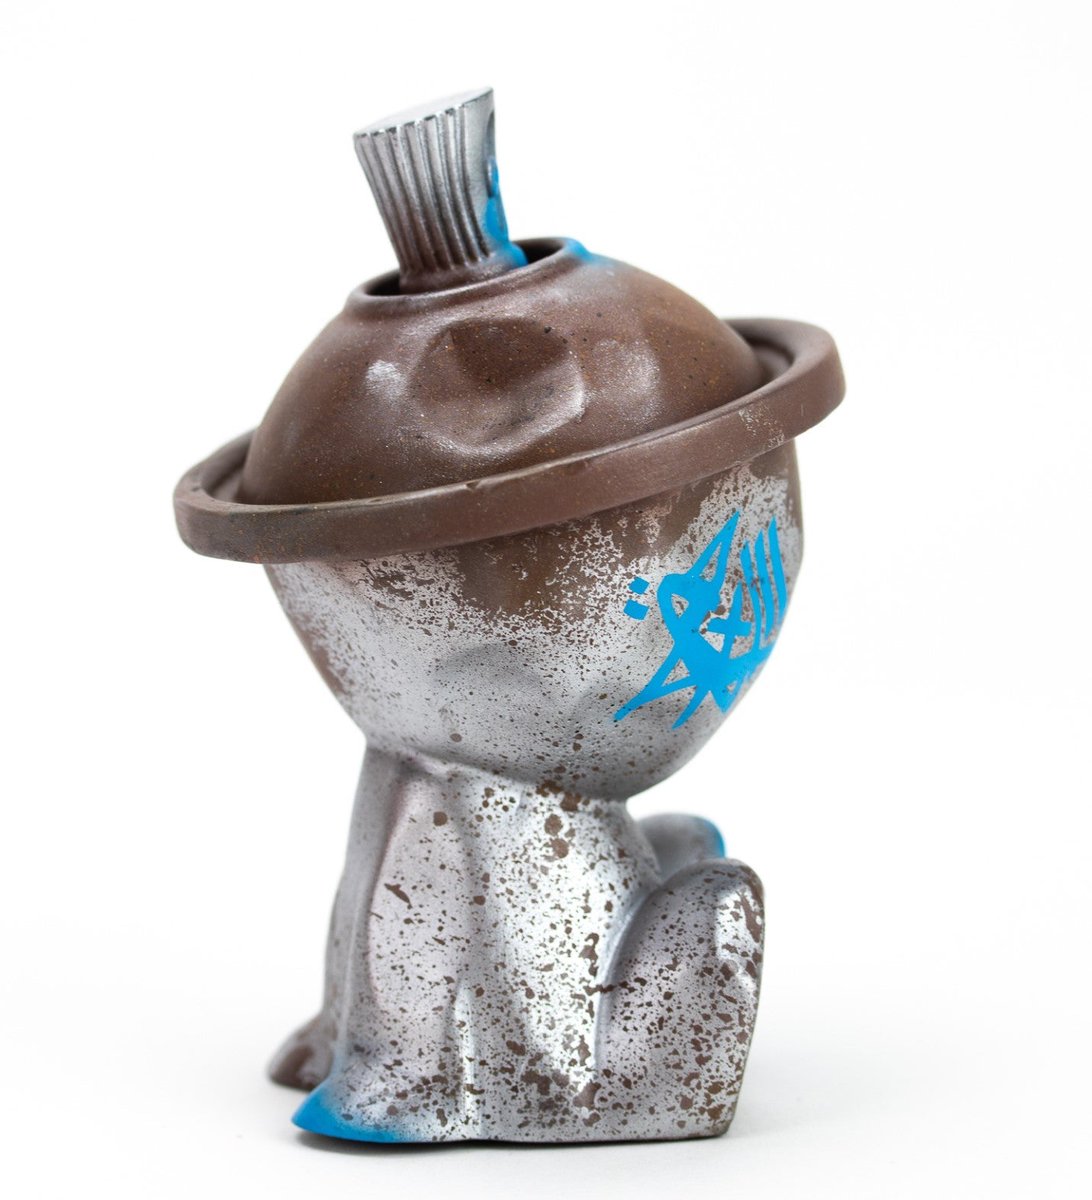 sprayedpaint.com/products/5oz-t…
5oz the Real OG #1 Original Canbot Art Toy by Czee13
#sculpture #artsculpture #ArtStatue #PopArtSculpture #GraffitiSculpture #art #graffiti #streetart #2022 #Blue #Brown #Canbot #Czee13 #Figure #Gray #OG #Original Artwork #Original Sculpture #Real OG #R...